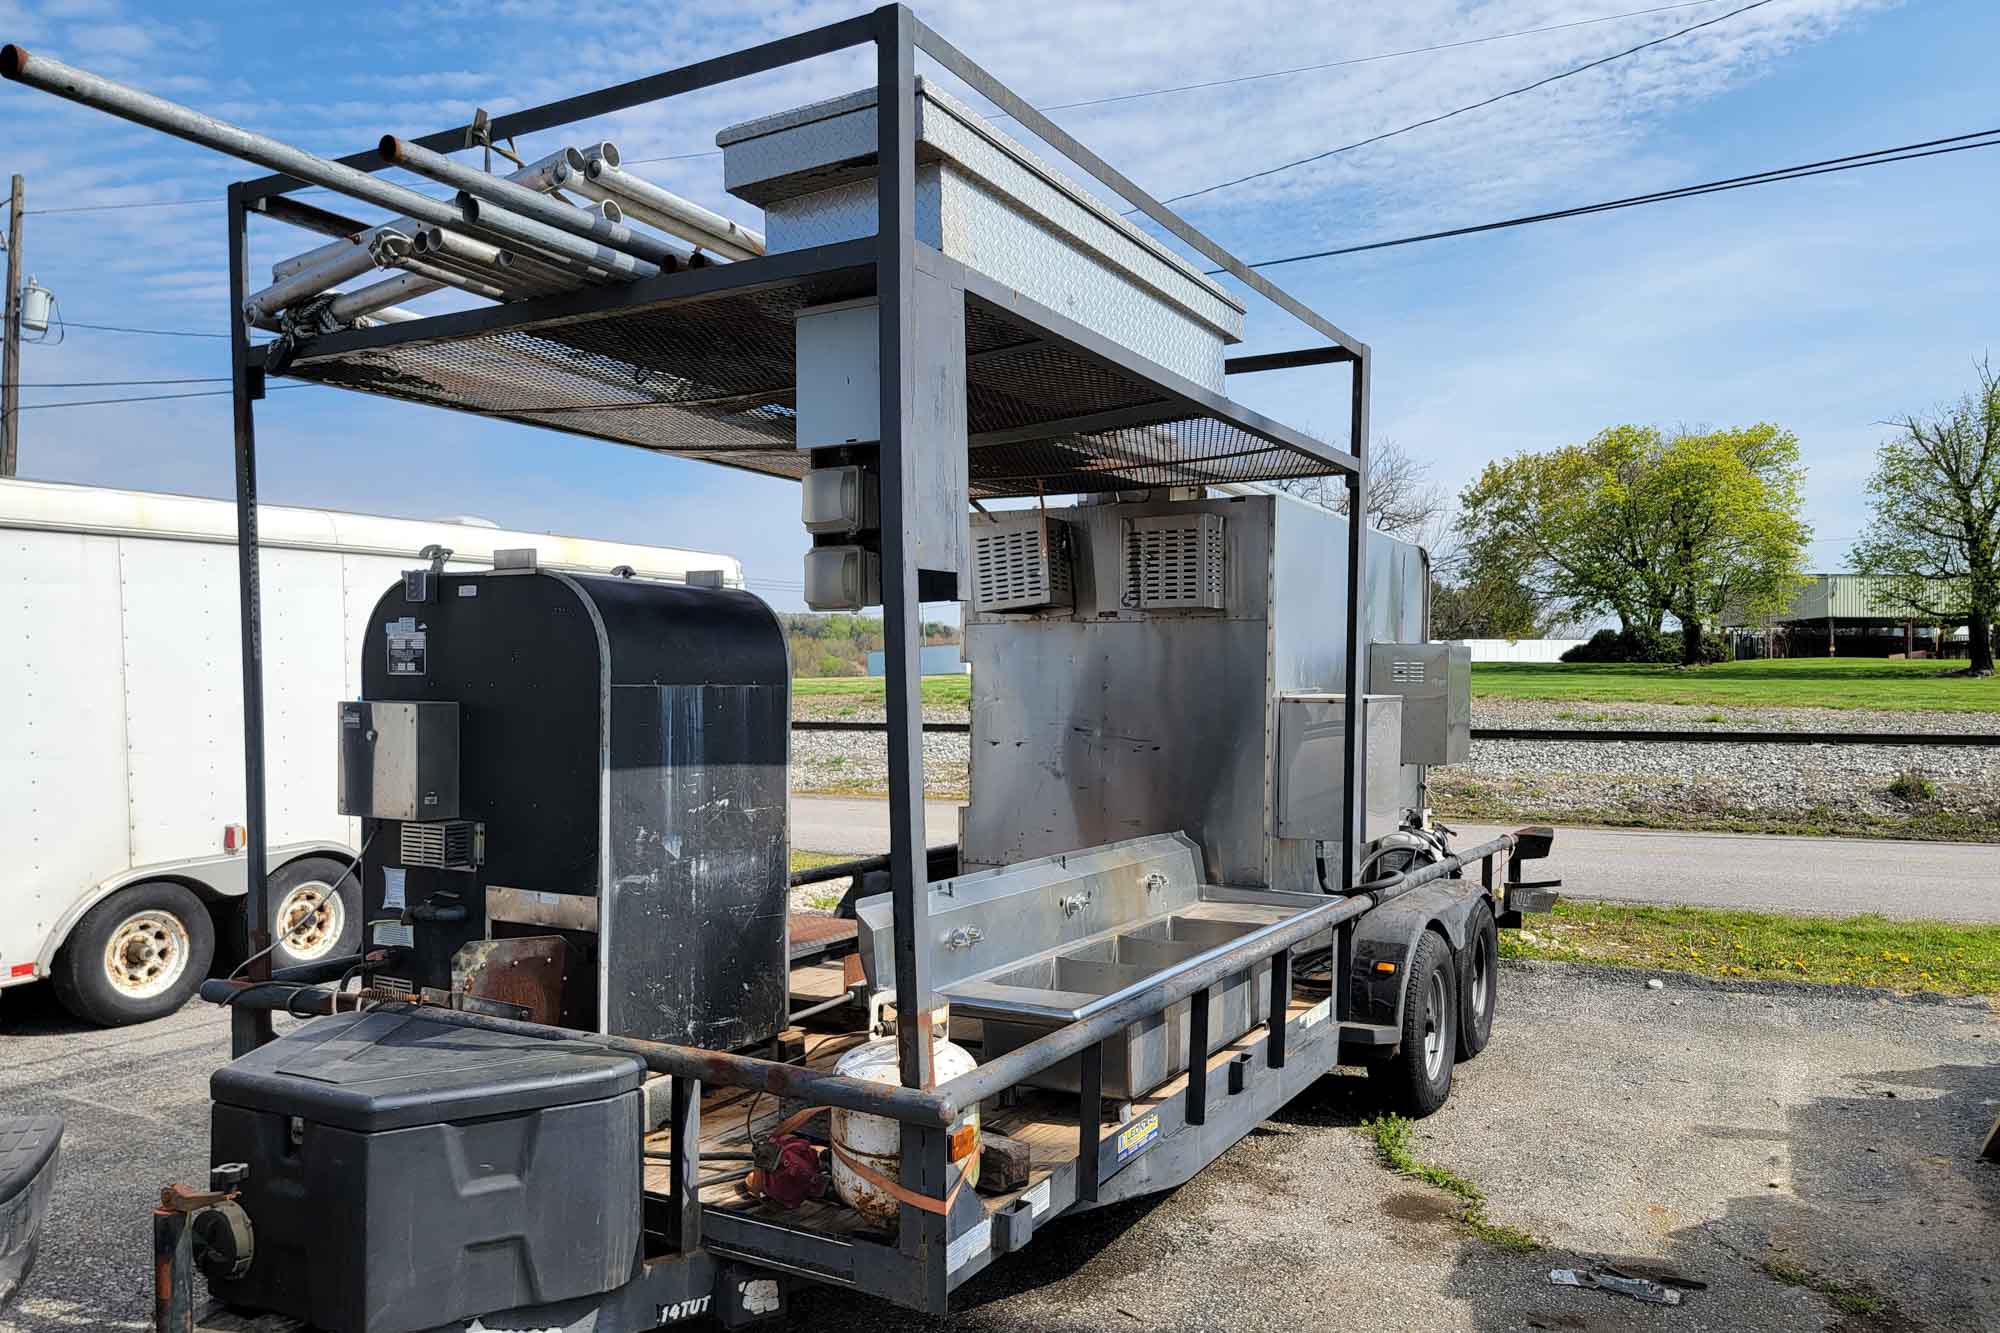 20' Double-Axle Trailer with SPK 1400 Southern Pride, Old Hickory Smoker 100, 3-Bowl Sink, and Tent Parts